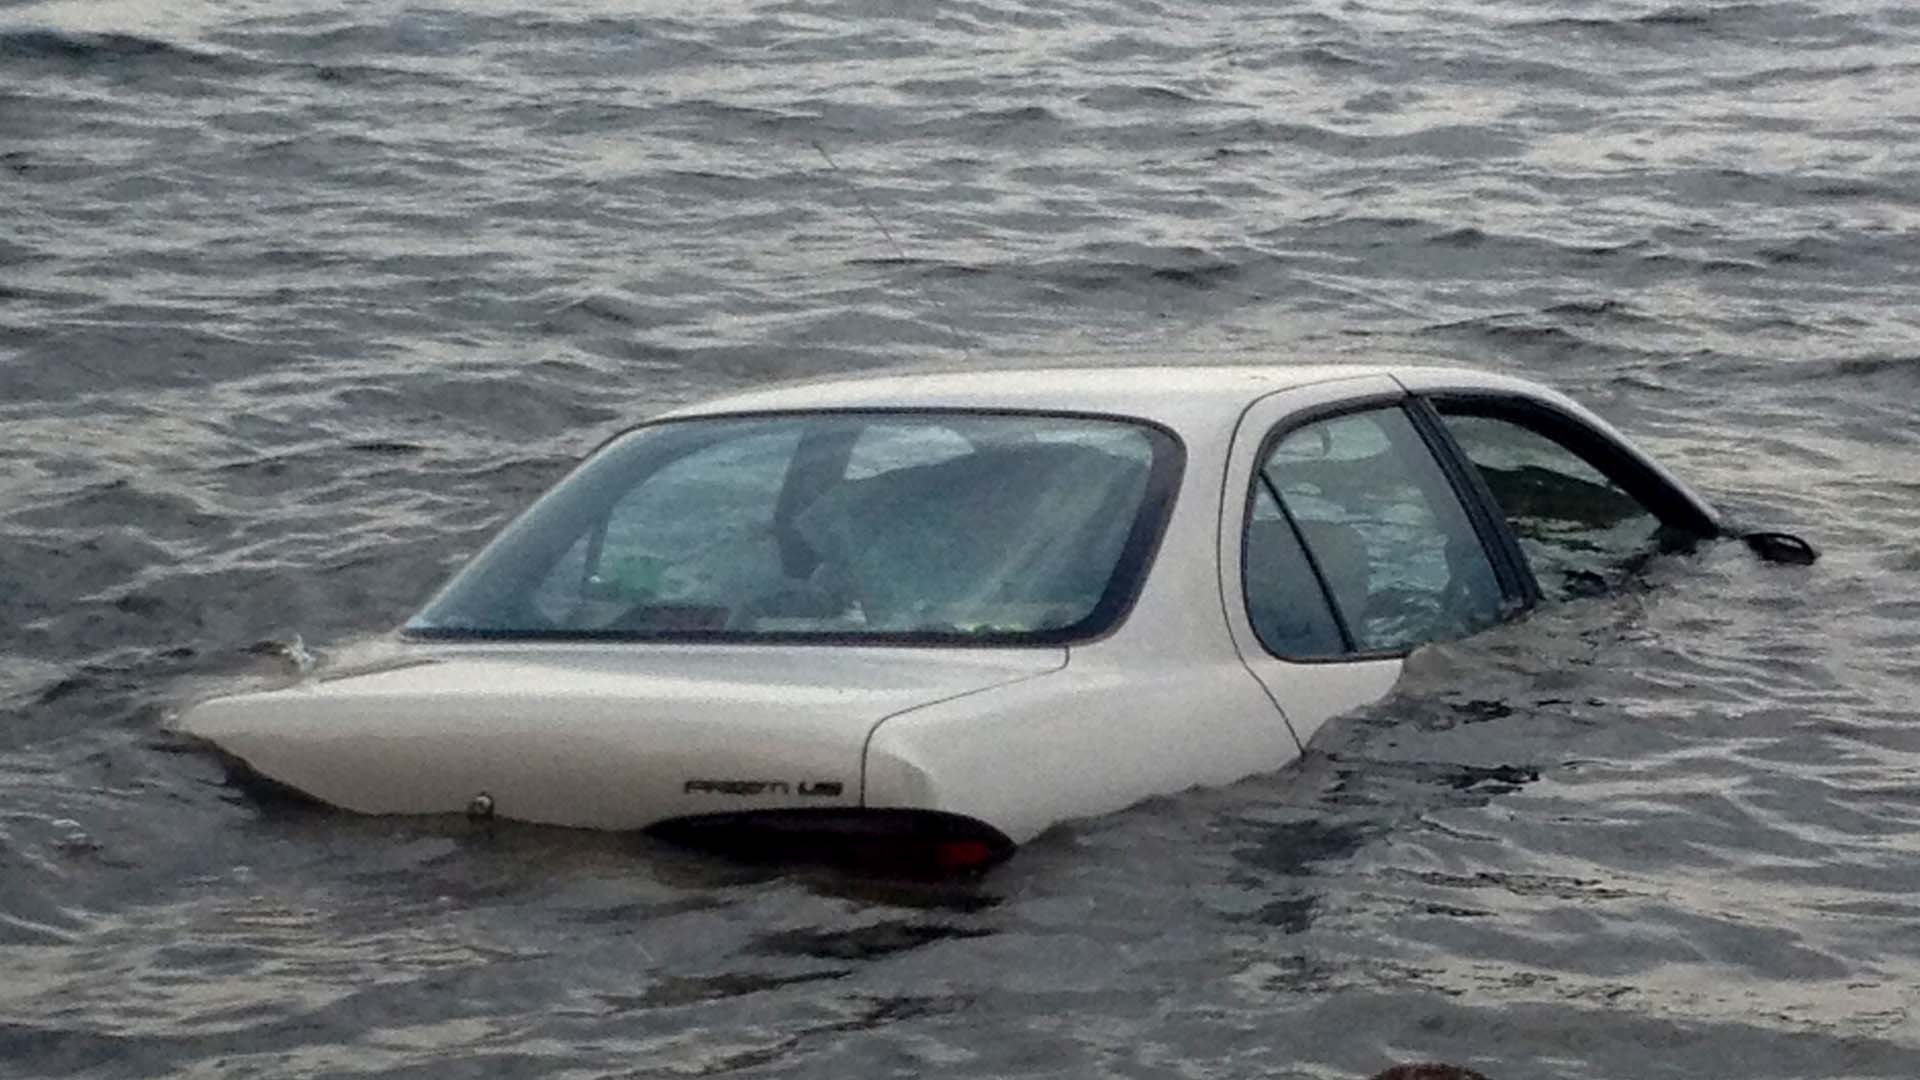 If you go into a lake when in a car don’t wait until the car fills with water, just open the window and get out ASAP. If you wait, you could be 200 feet down or flipped over on the bottom. The power will still work for a short time. It only takes a few seconds. <br><br>
 
- u/discostud1515